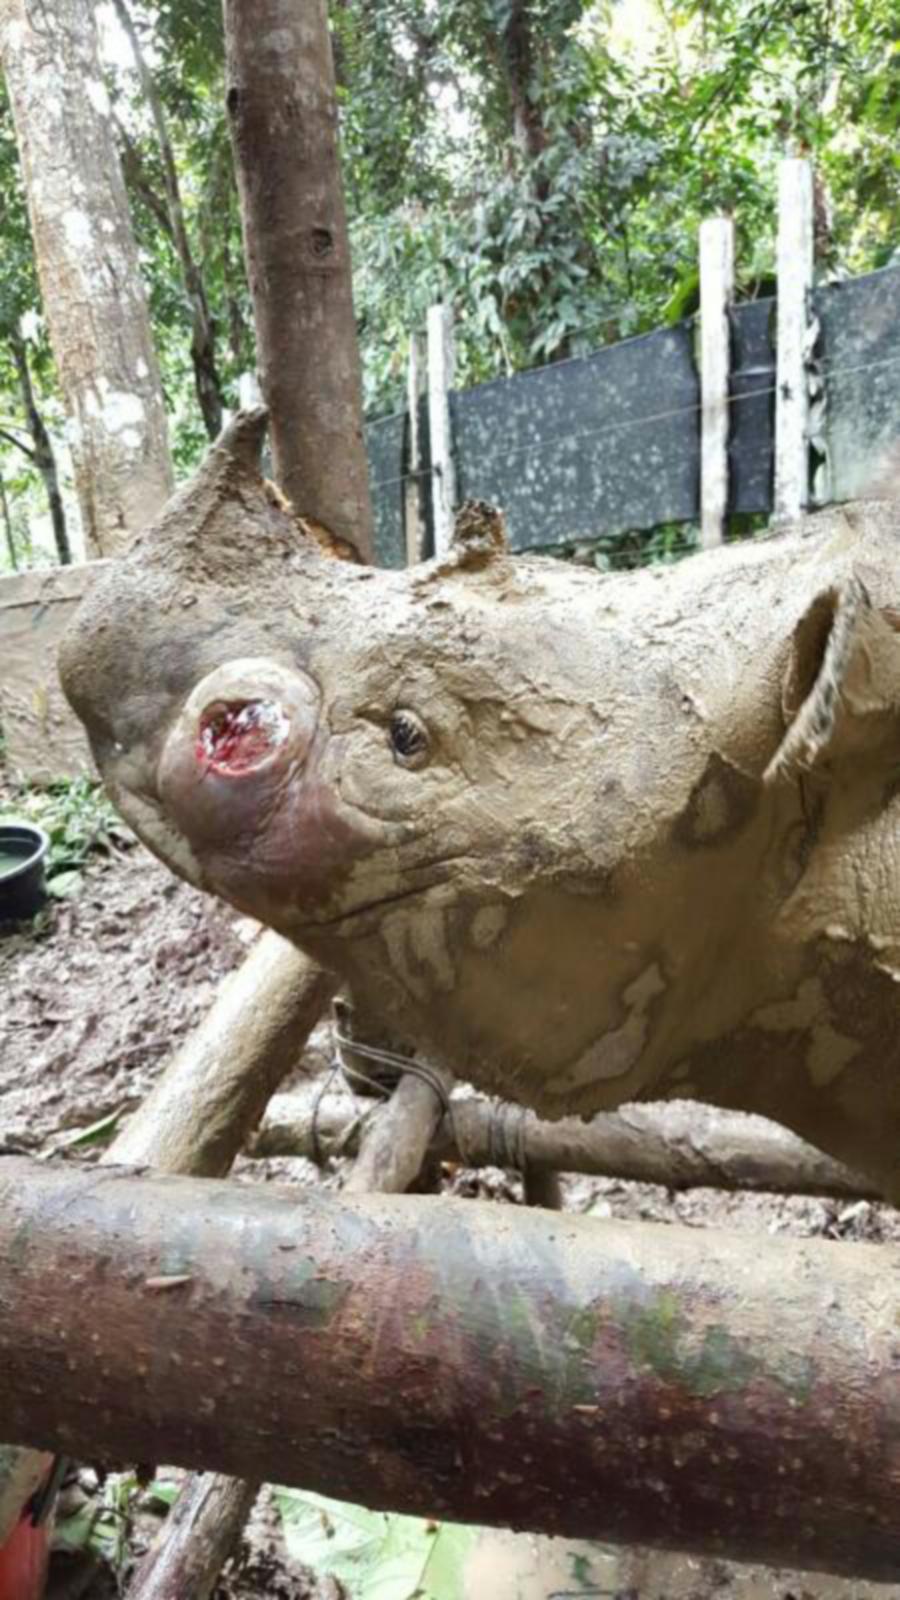 Puntung and the abscess on her left cheek. Image credit to New Strait Times. 